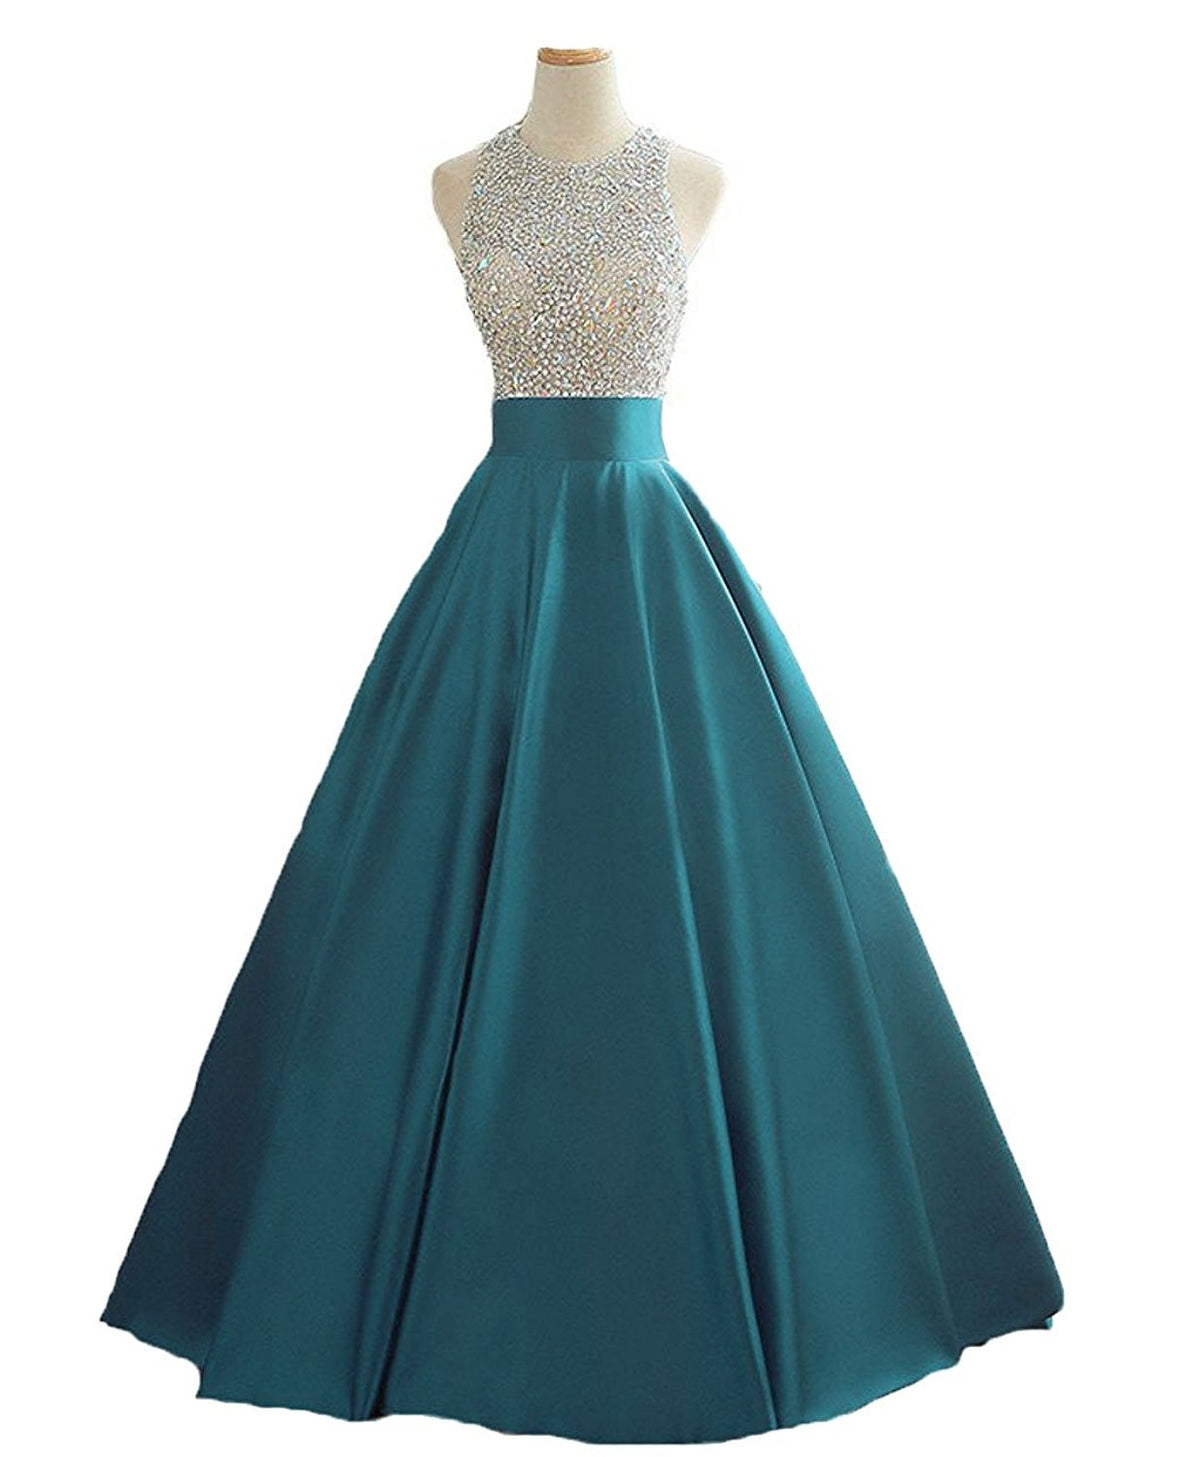 Elegant High Neck Beading Crystal Prom Dresses Long Satin A Line Two Pieces Evening Gowns